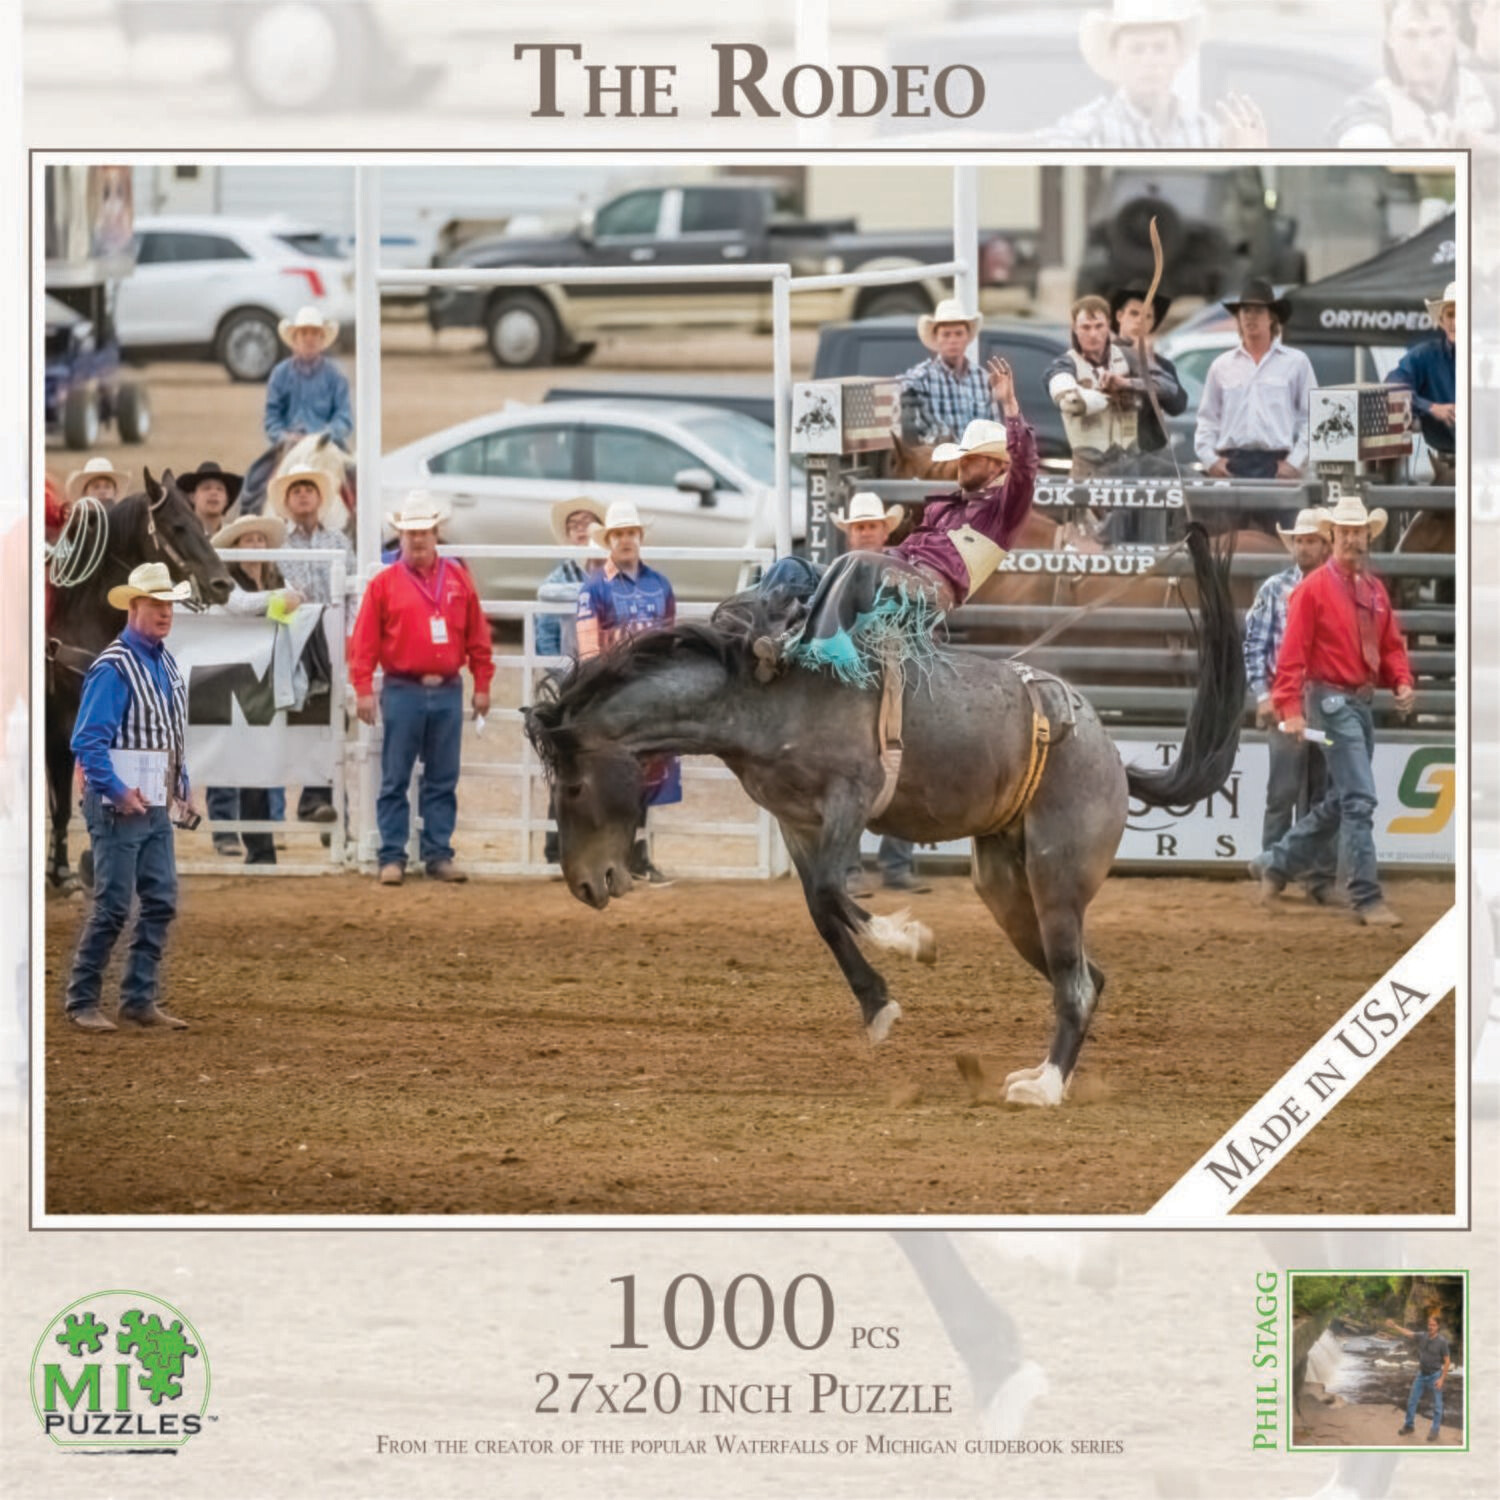 THE RODEO